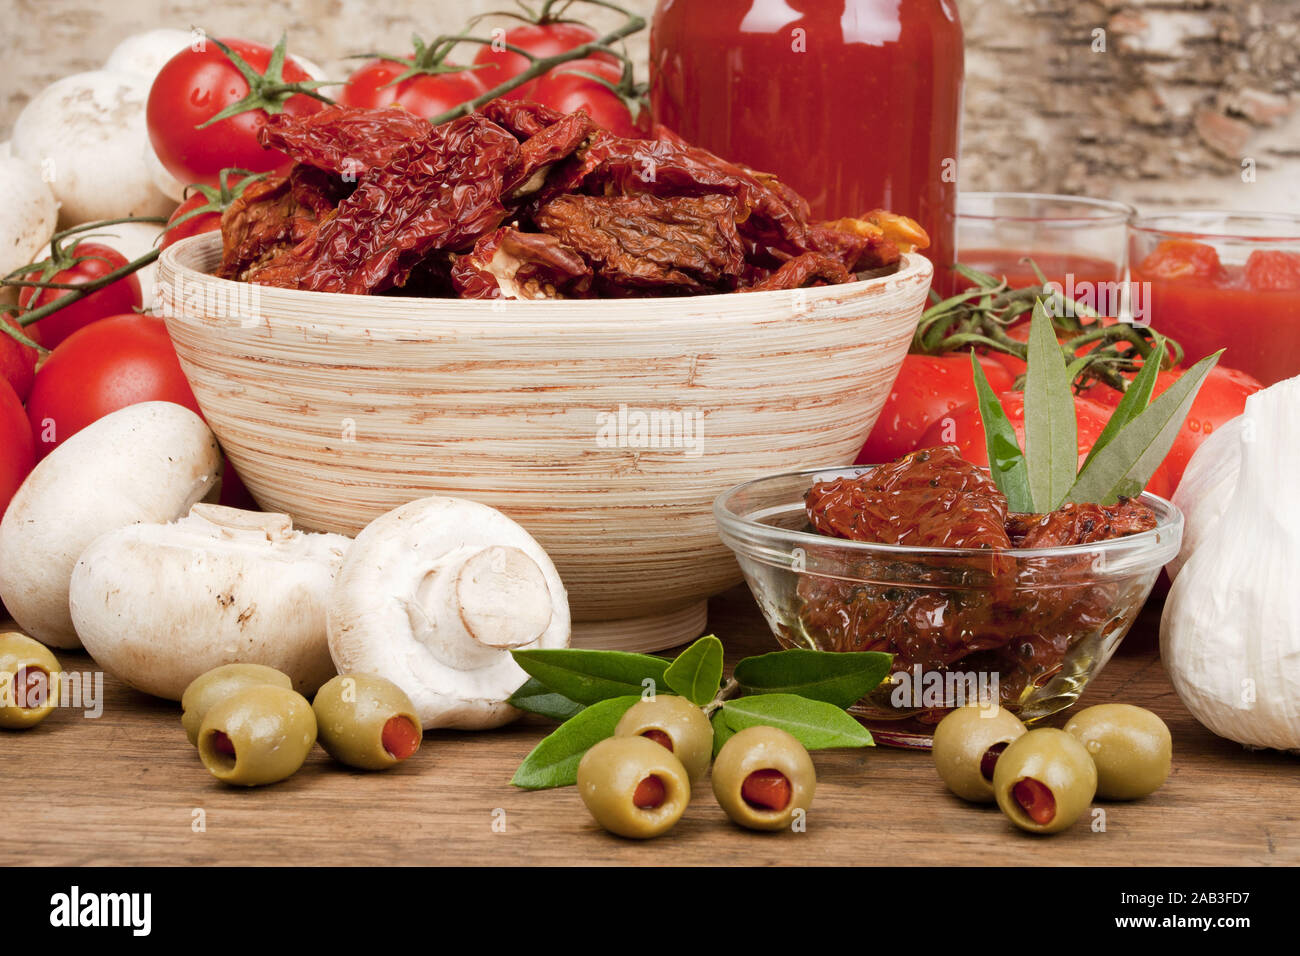 Tomaten mit Champions, Knoblauch und Oliven |Tomatoes with mushrooms, garlic and olive| Stock Photo